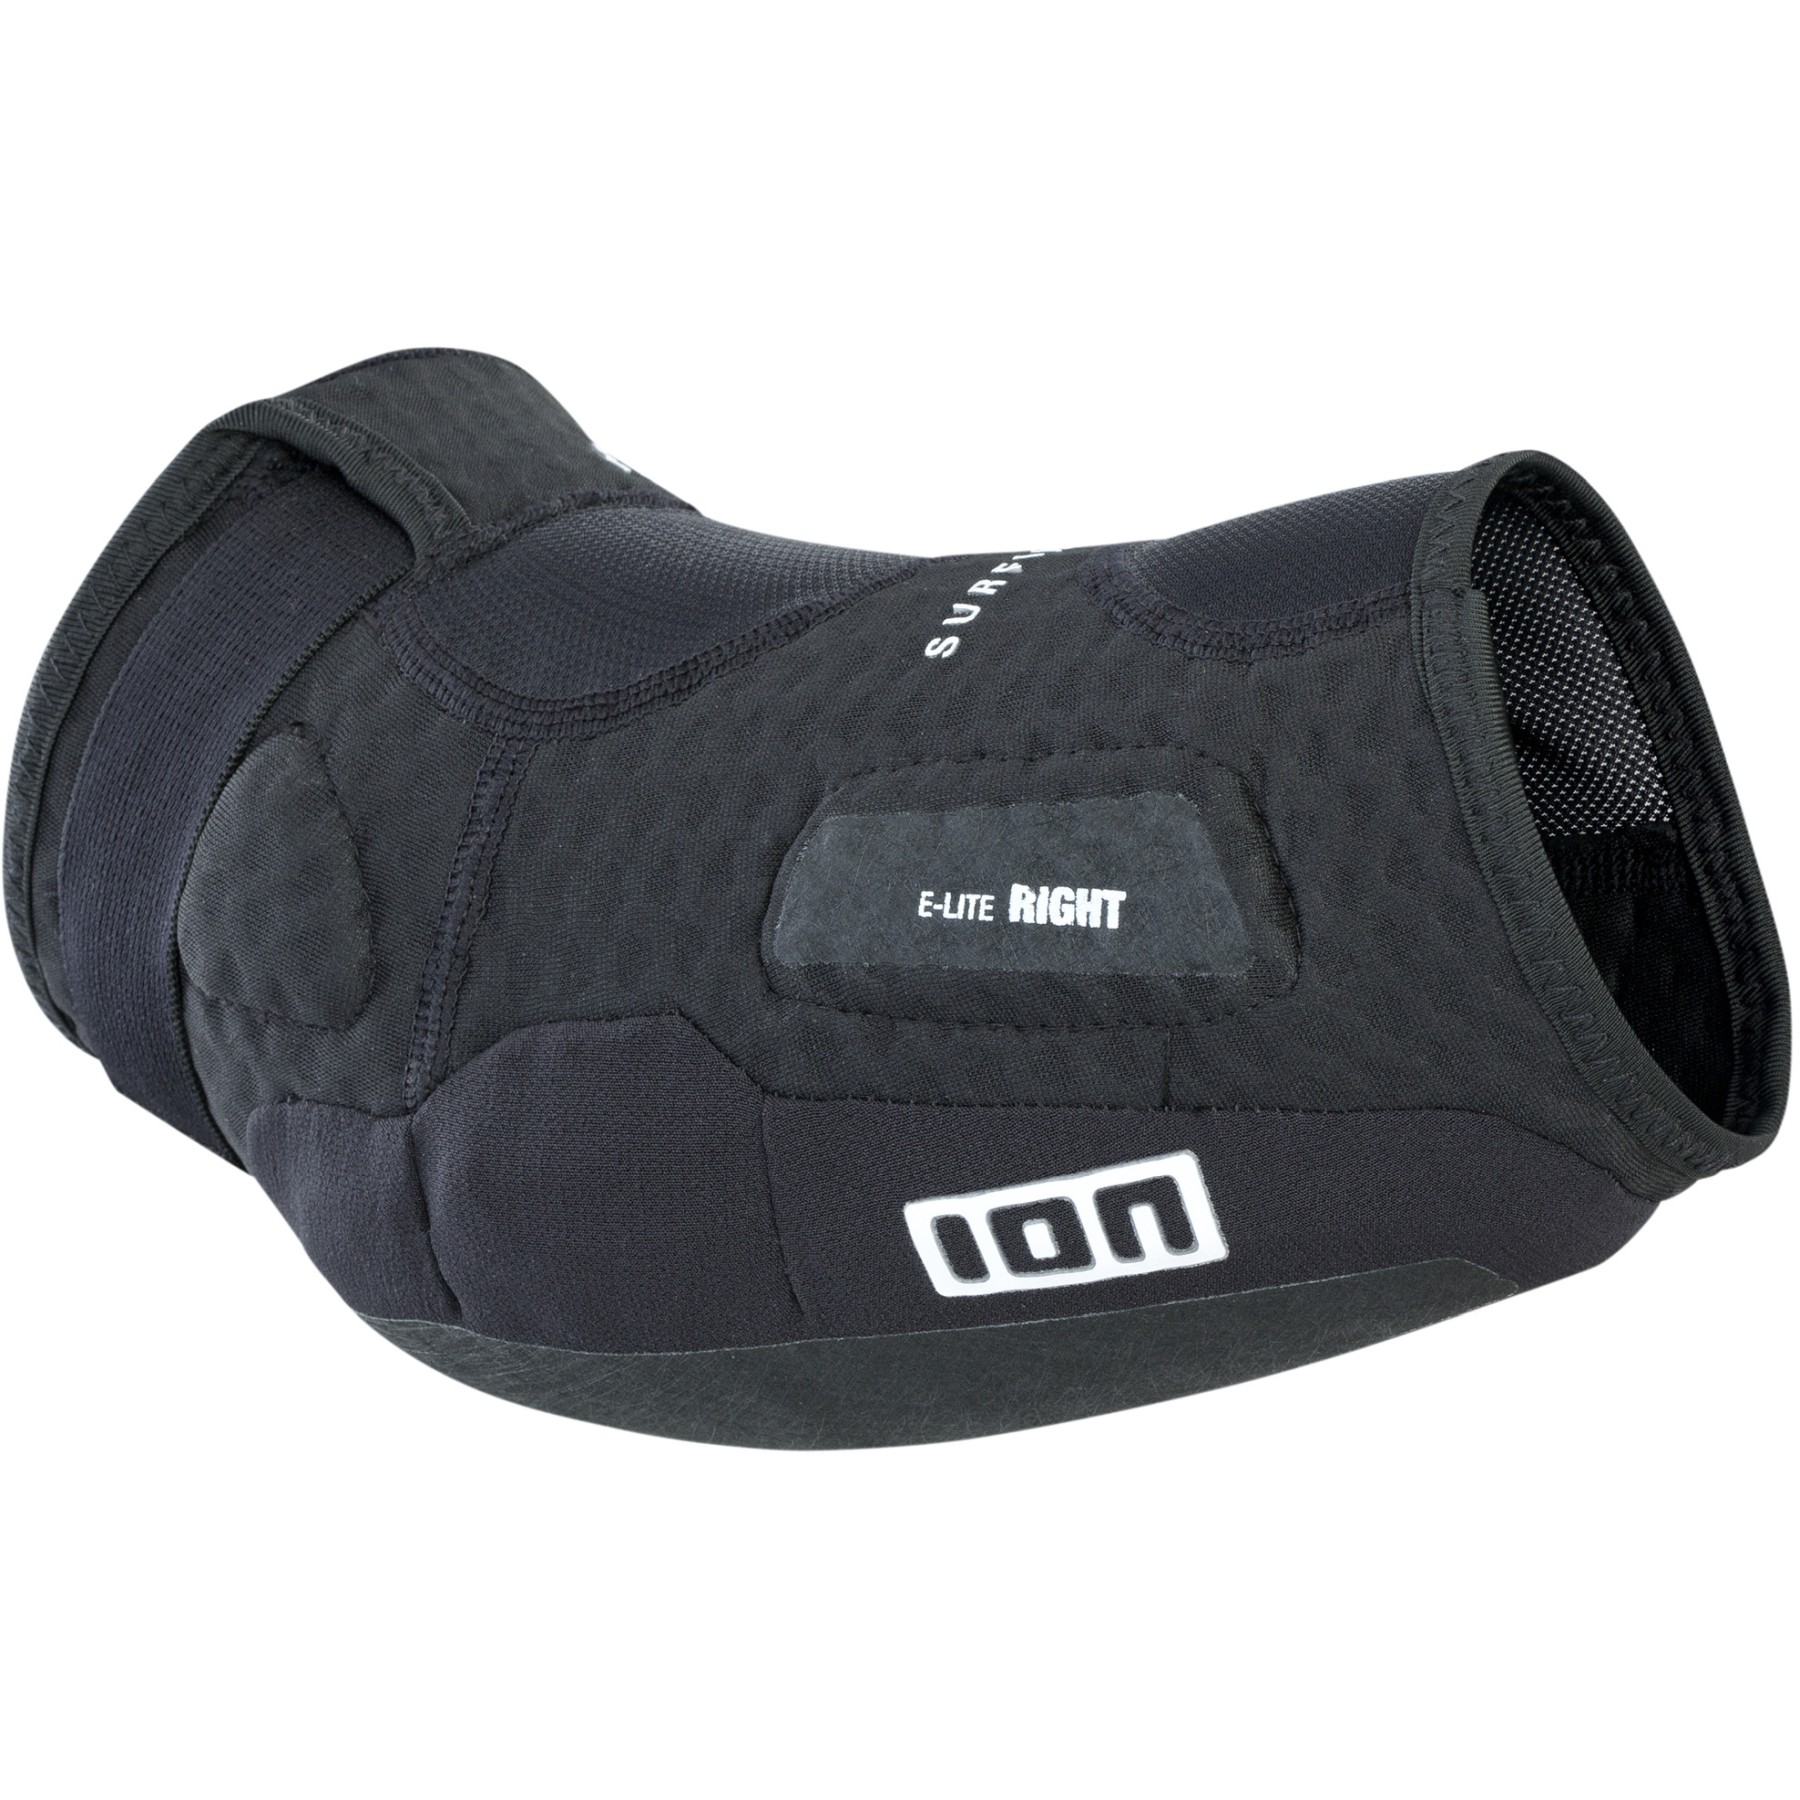 Picture of ION Bike Protection E-Lite Elbow Guards - Black